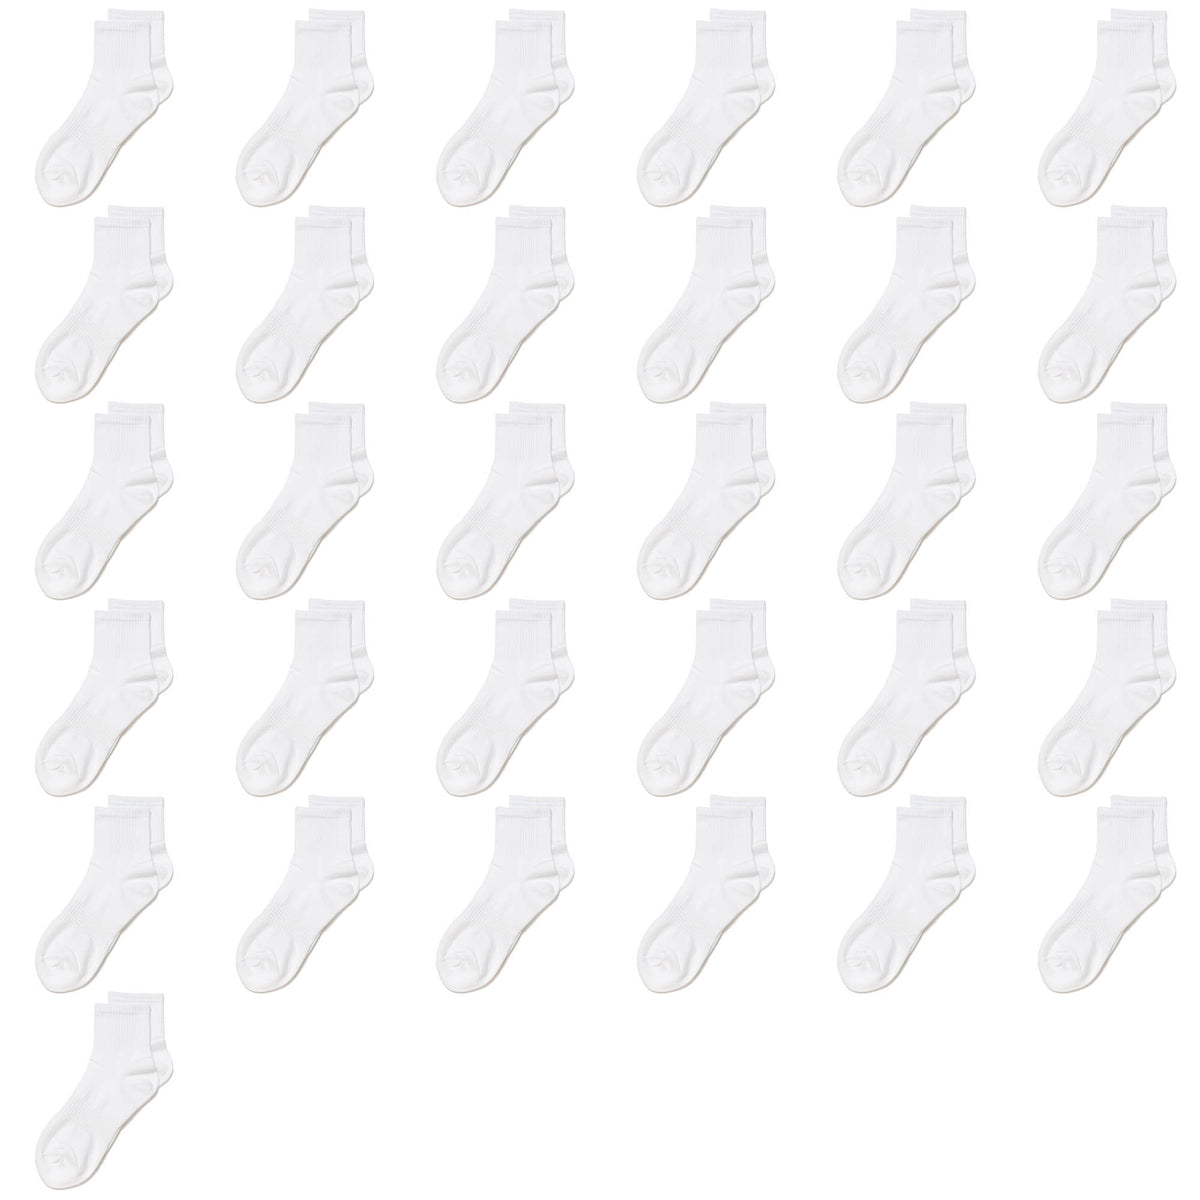 31 Pairs of High Cotton Low Ankle Men's Socks With Anti-Fungal Powder